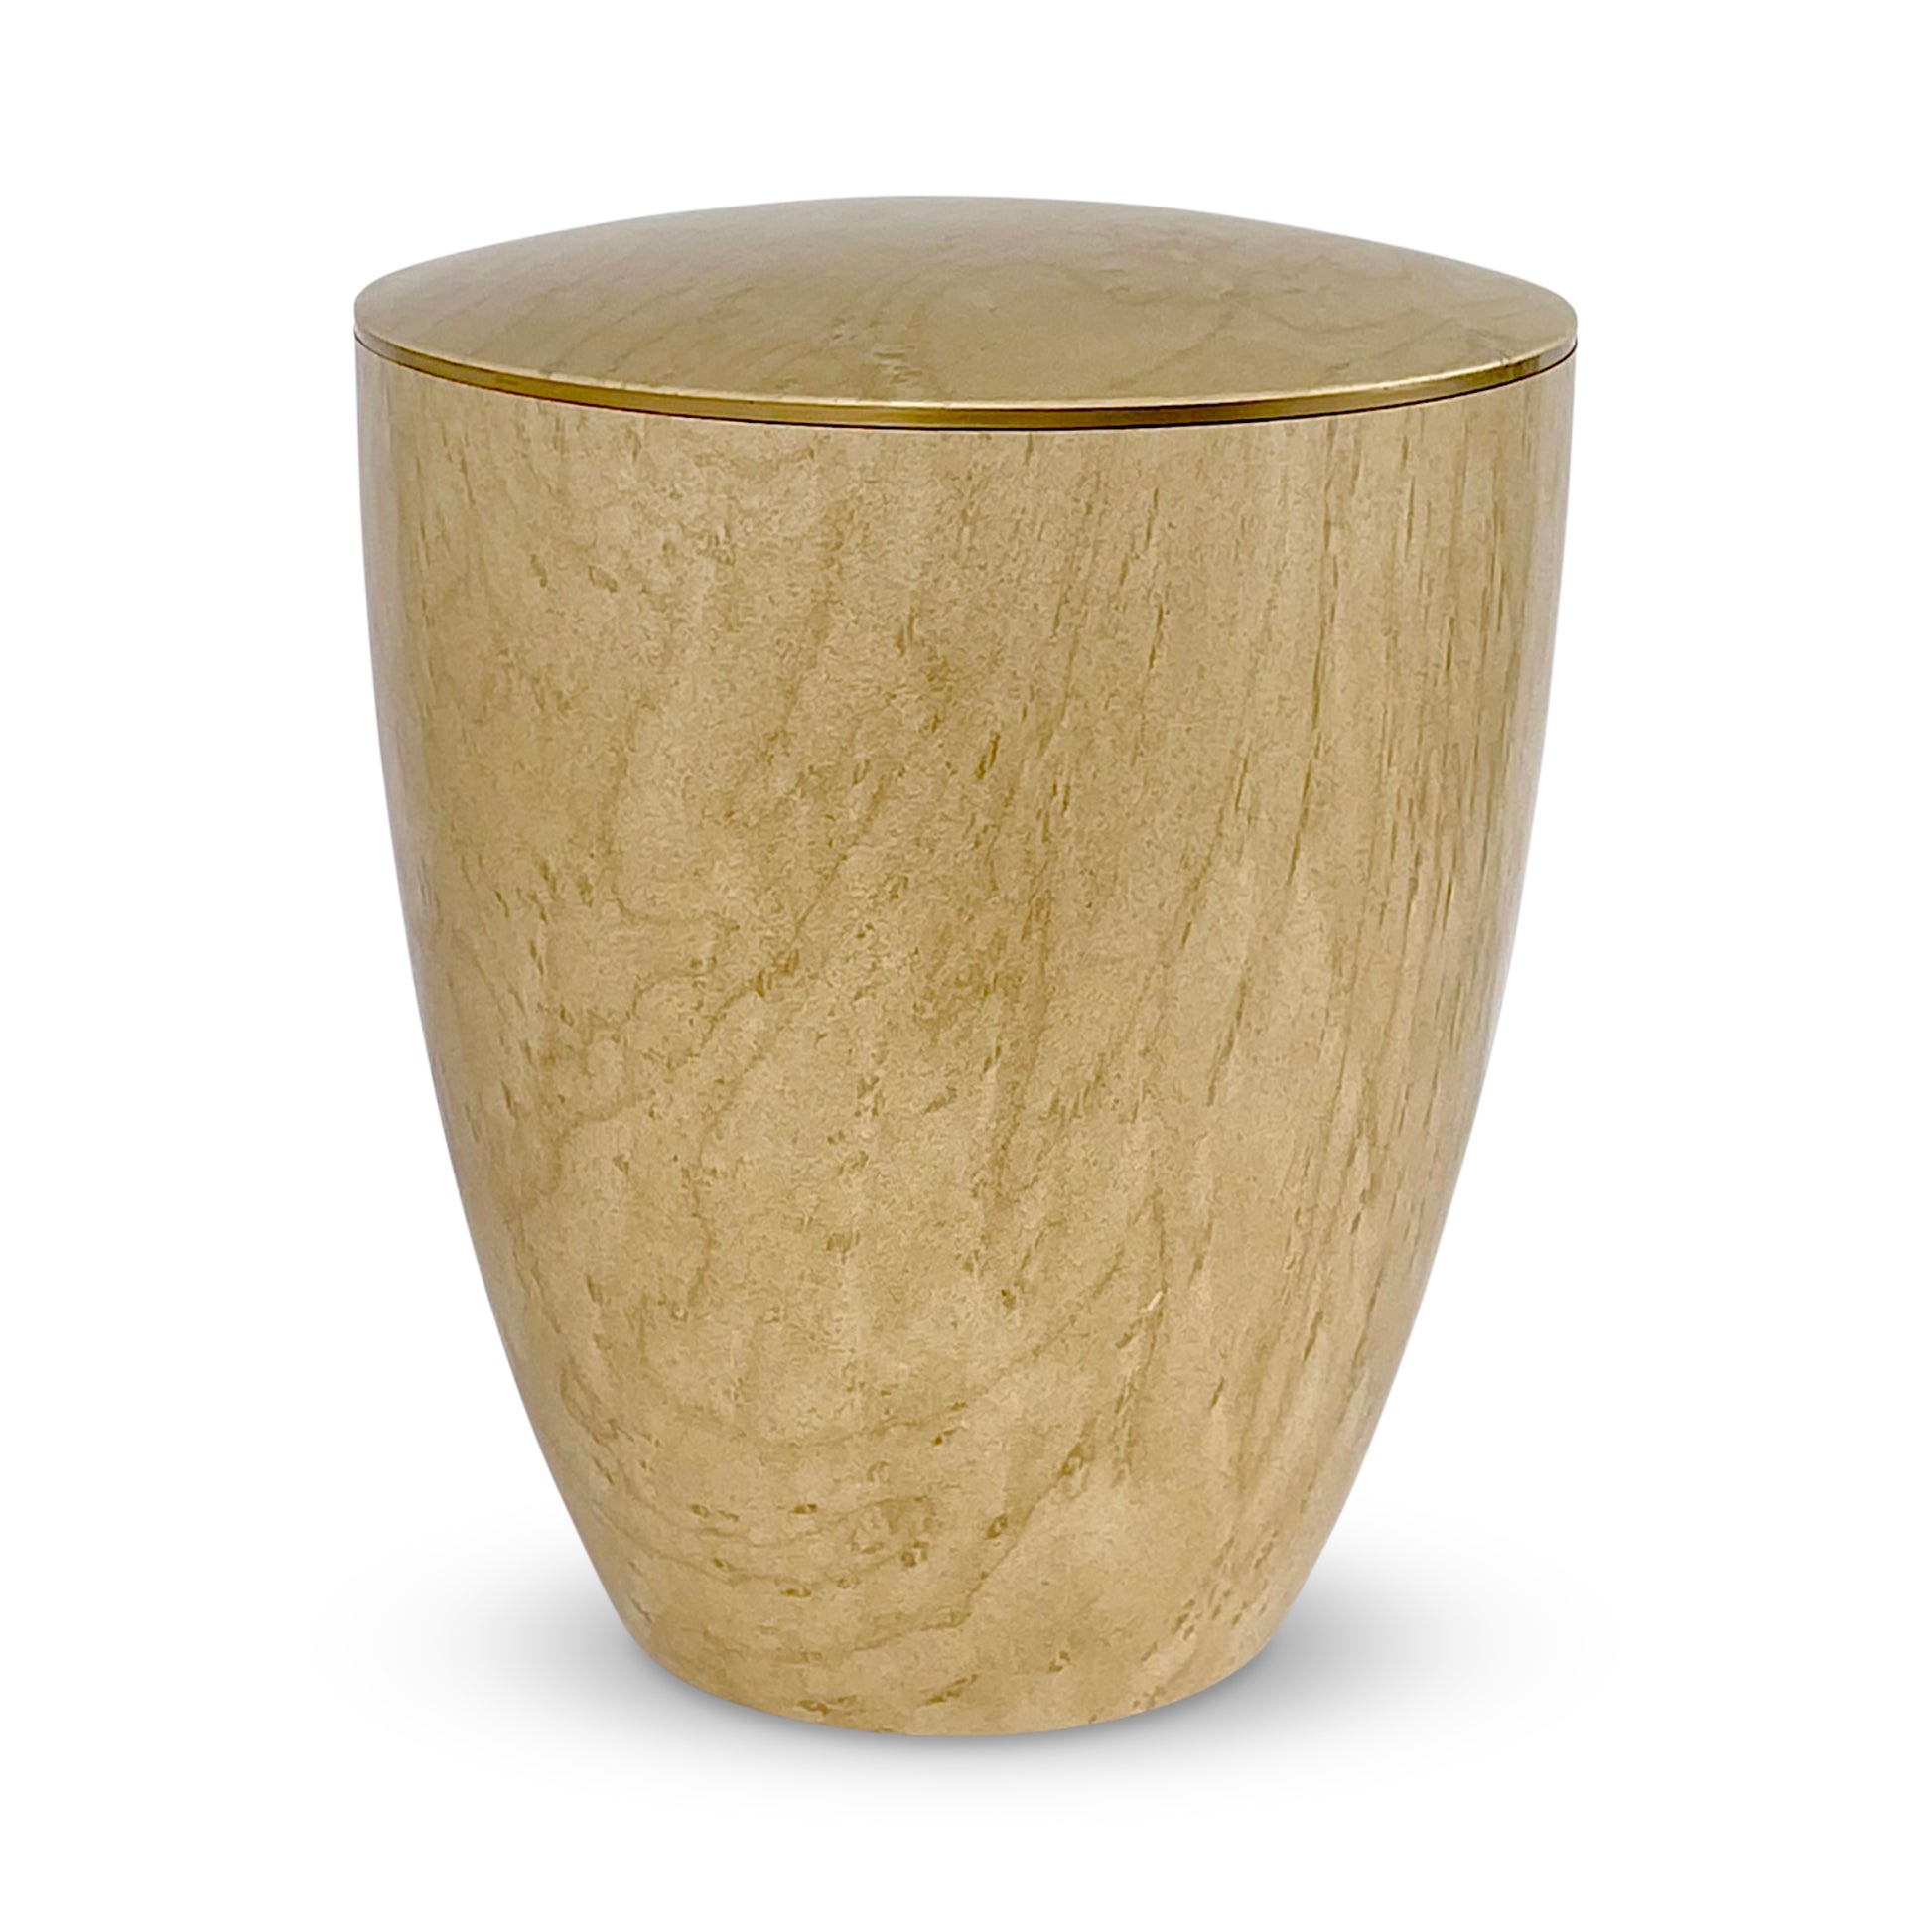 Beautiful and natural looking blonde maple wood imitation urn for ashes with a delicate gold ring around the lid.